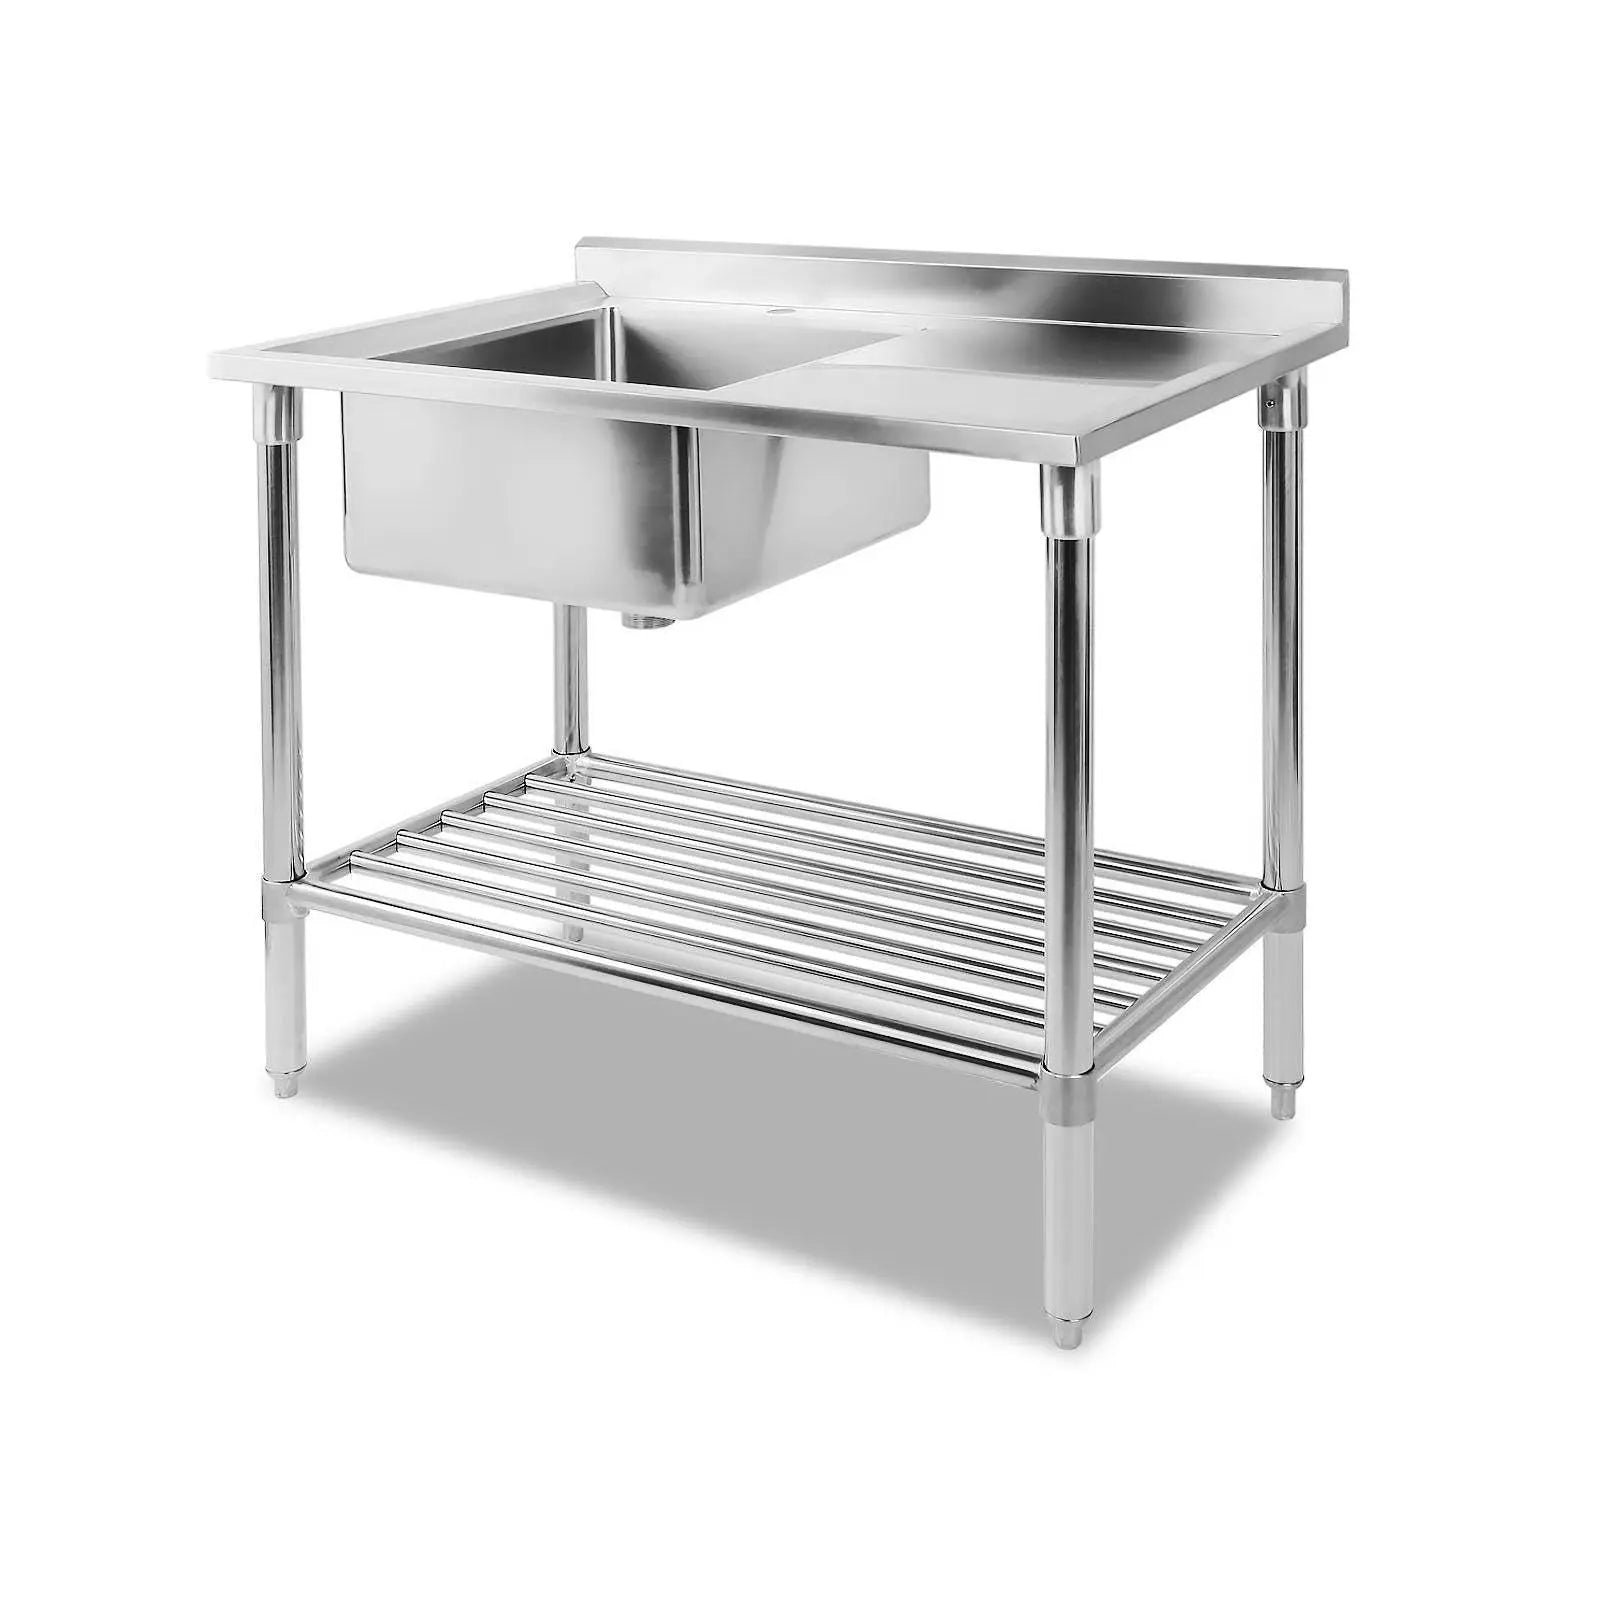 Cefito 100x60cm Commercial Stainless Steel Sink Kitchen Bench Deals499